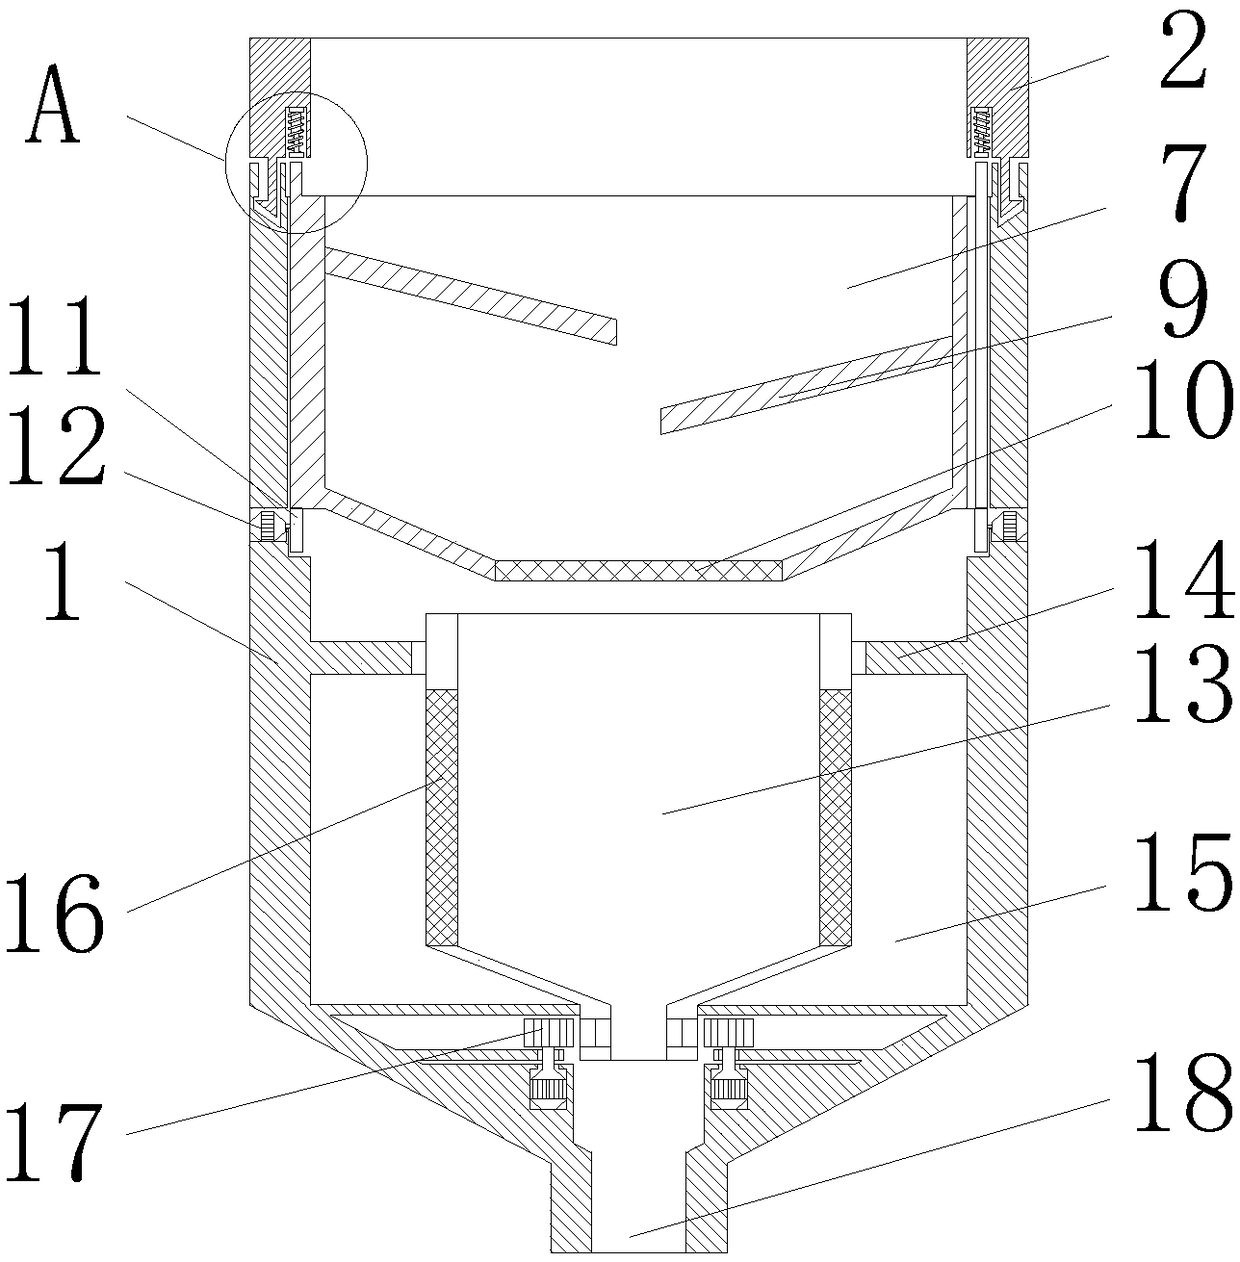 Button screening device for garment processing